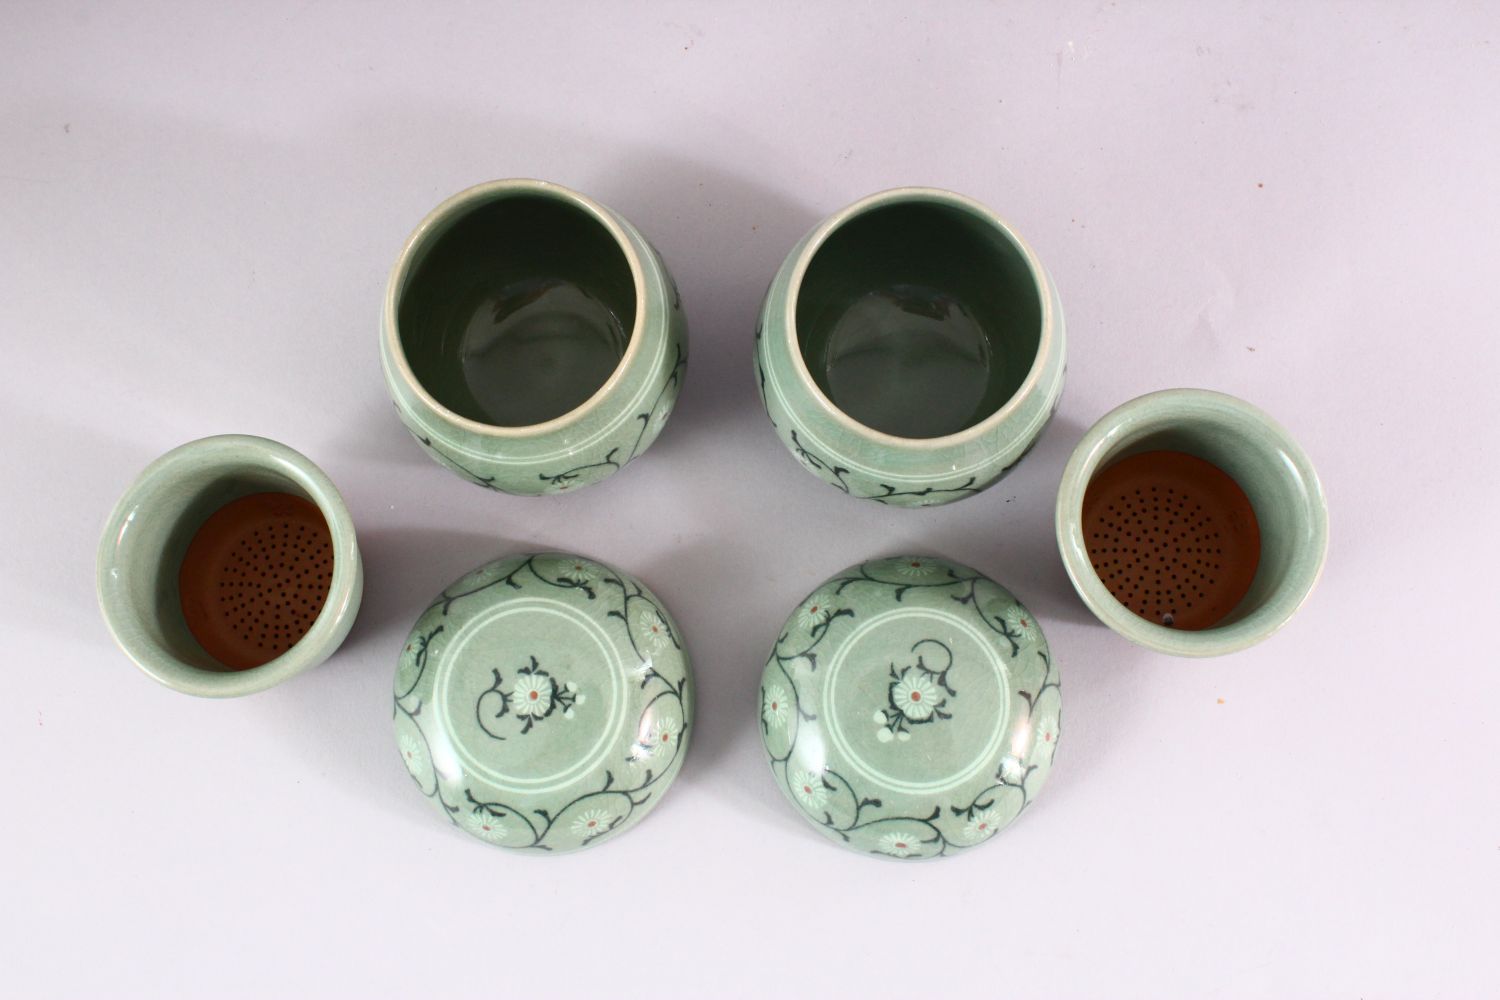 THREE 20TH CENTURY KOREAN CELADON PORCELAIN TEA SET, the body decorated with formal floral - Image 3 of 6